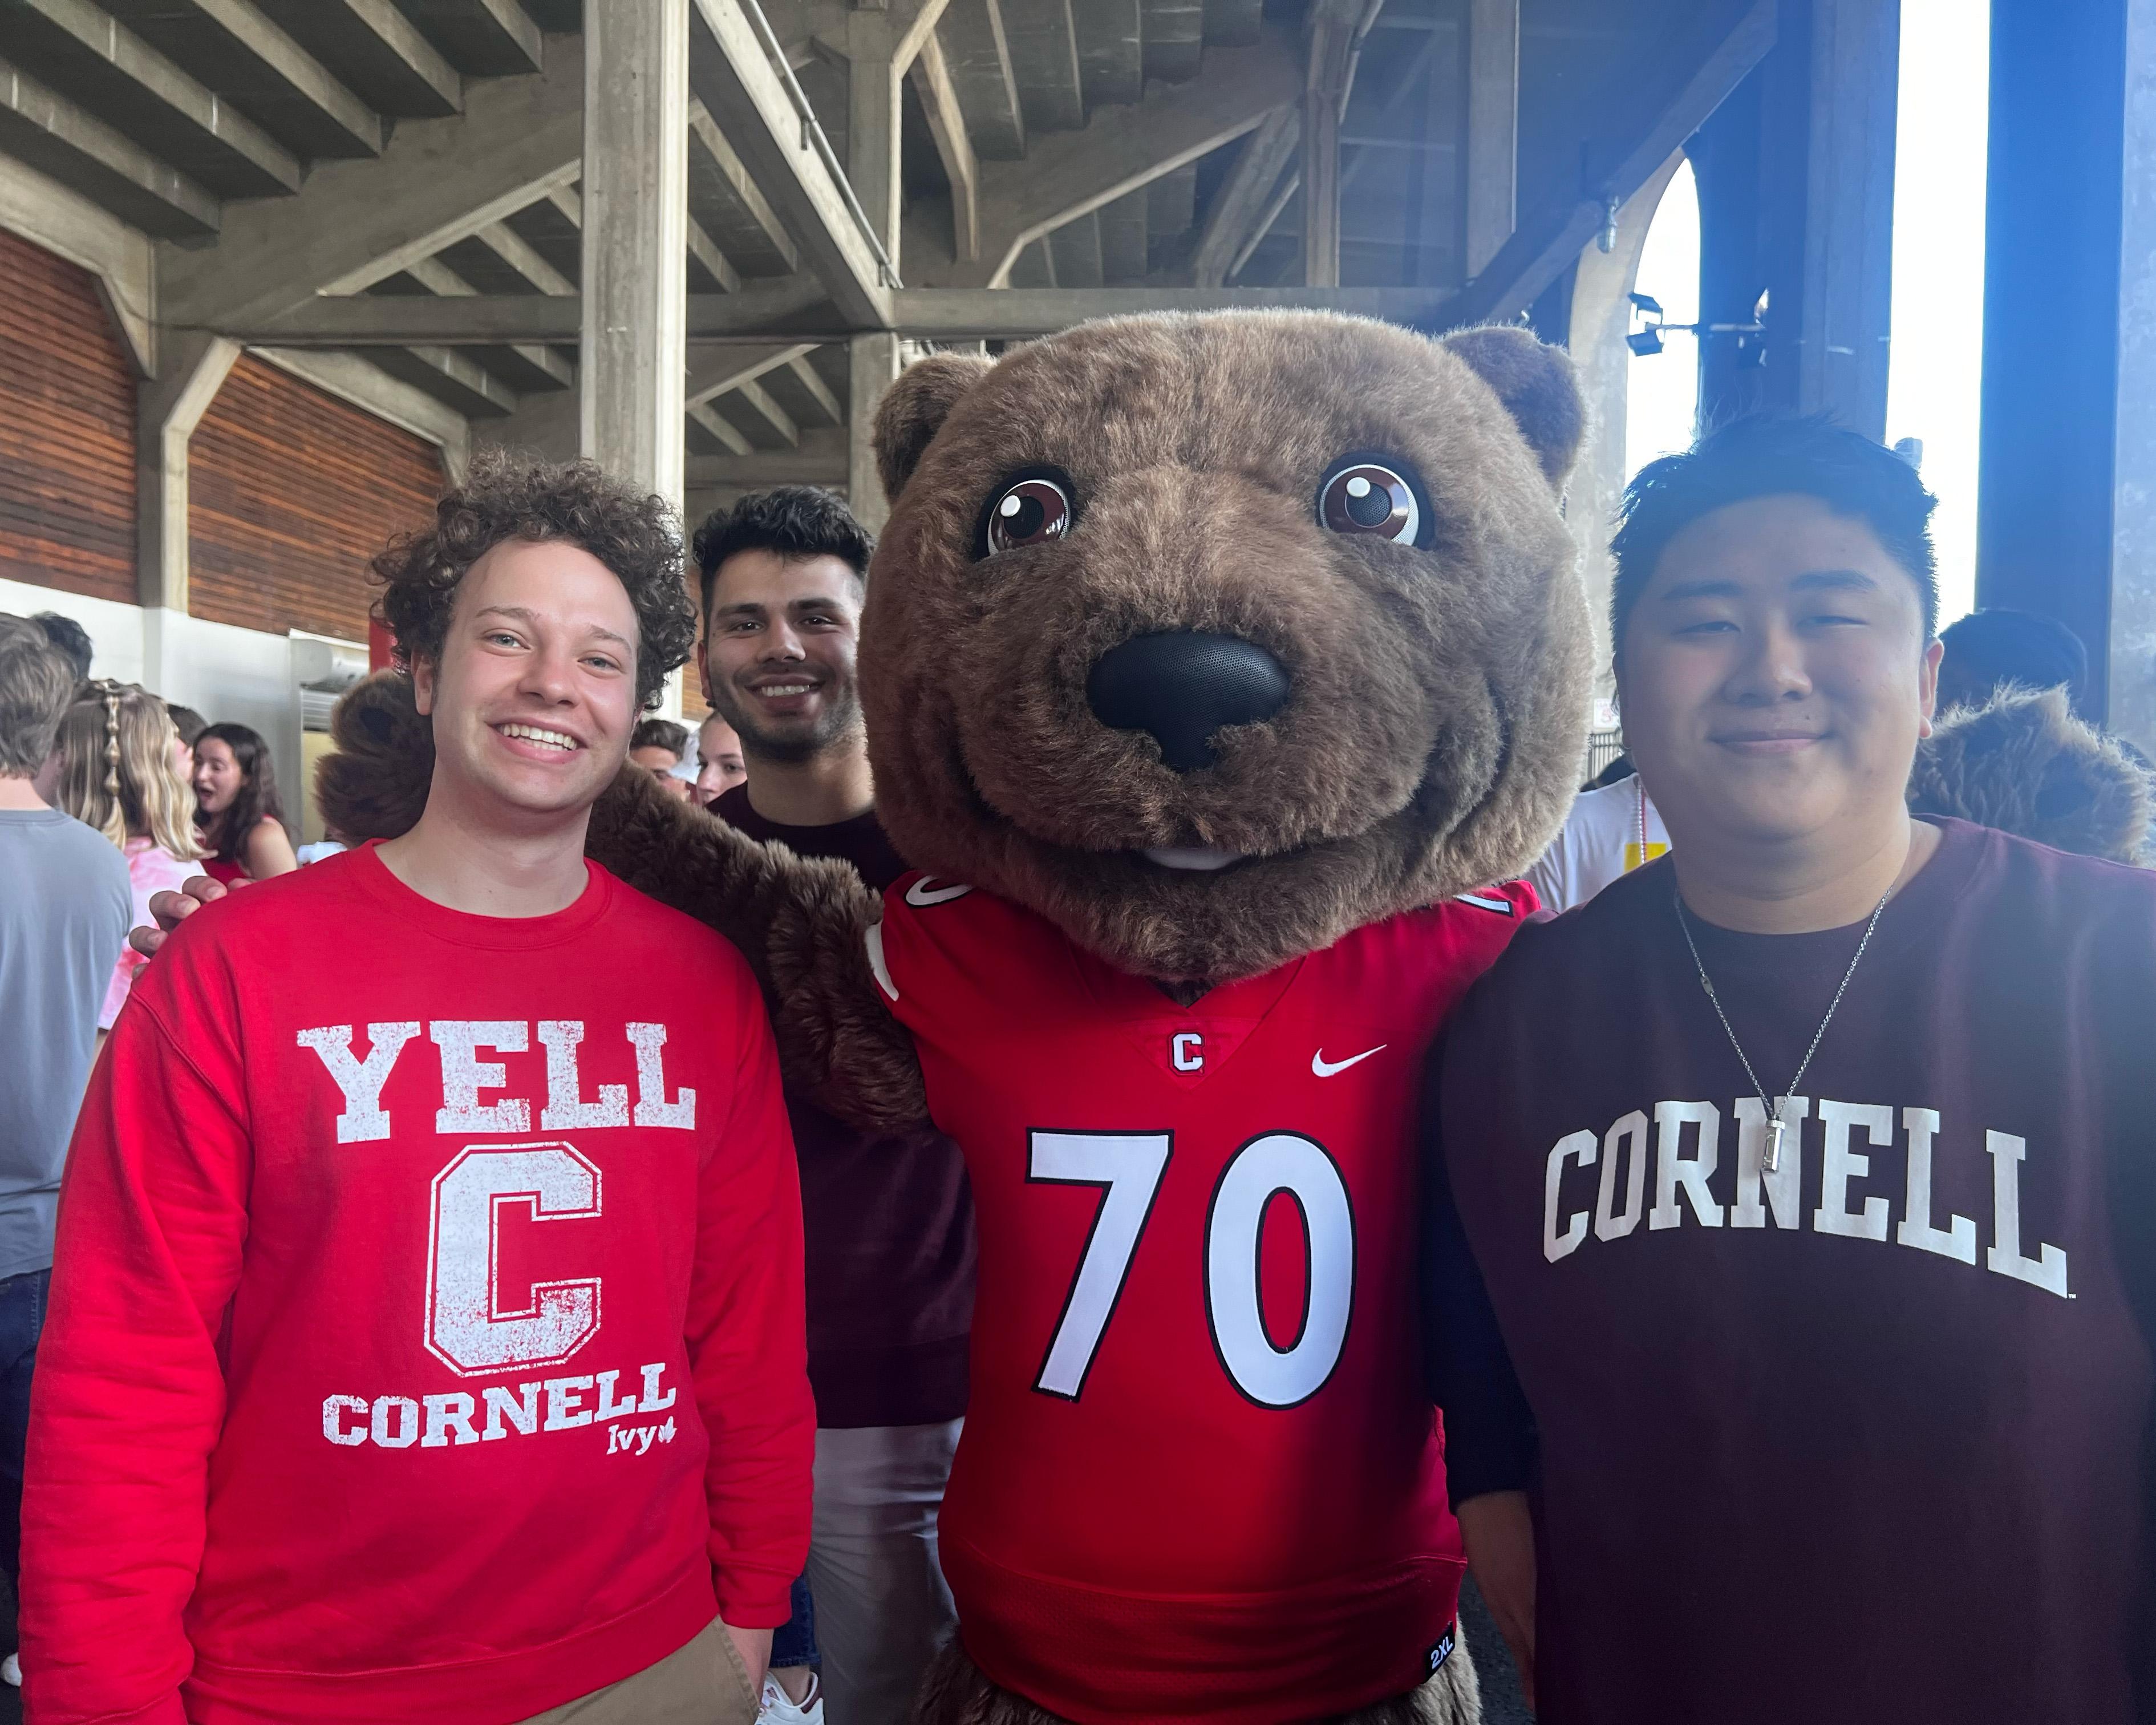 Me, my housemates, and Touchdown the cornell mascot at a football game